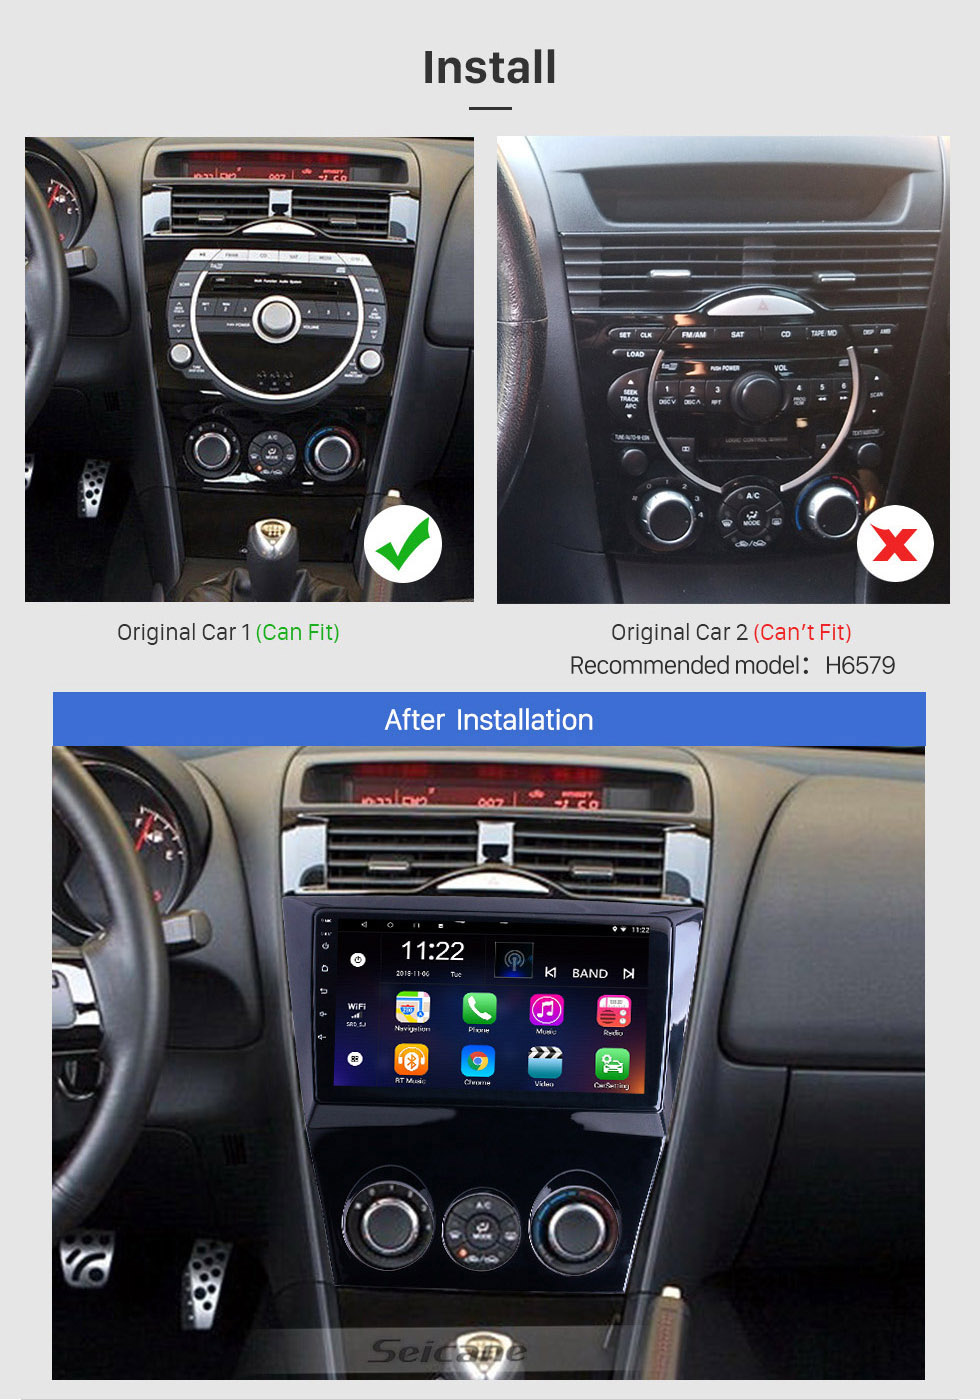 Seicane 9 inch HD Touchscreen Android 10.0 For 2020 VW Volkswagen Variant car Radio with Bluetooth GPS Navigation System Carplay